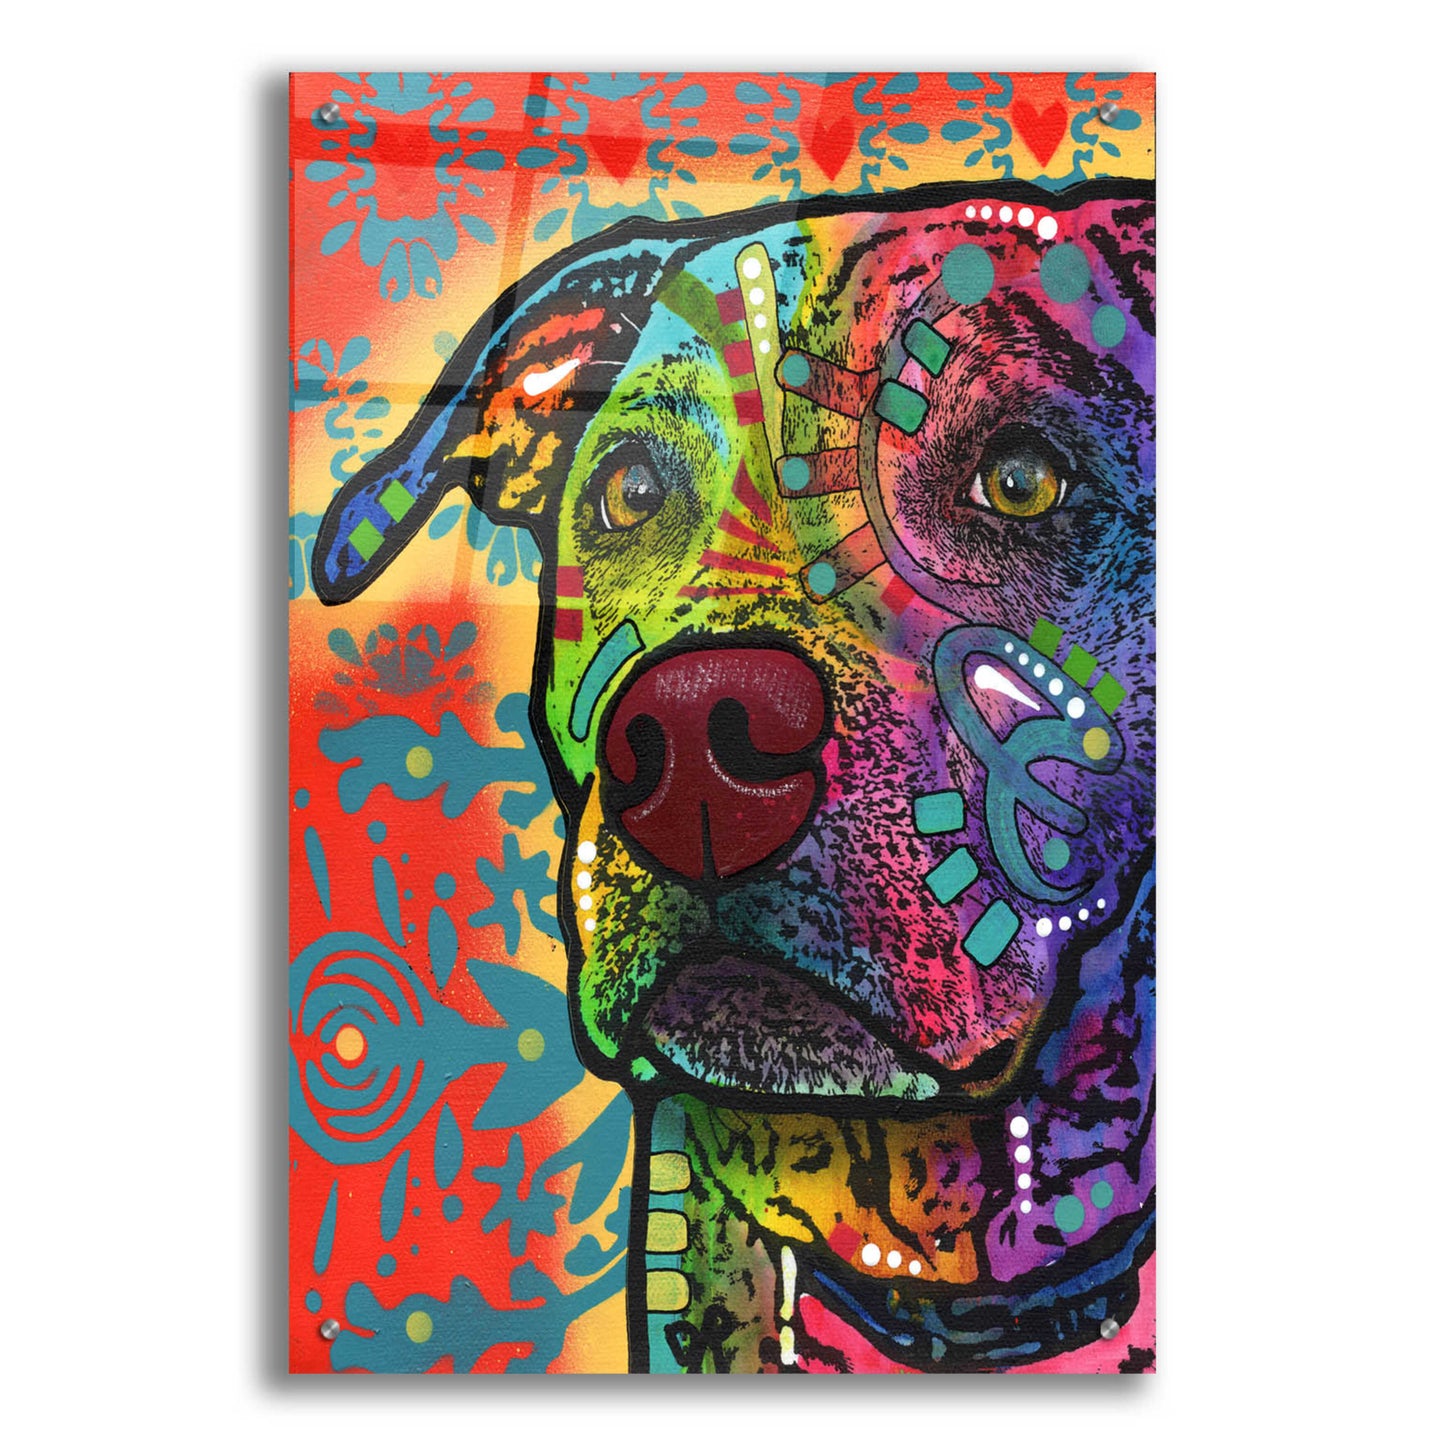 Epic Art 'Huckleberry' by Dean Russo, Acrylic Glass Wall Art,24x36